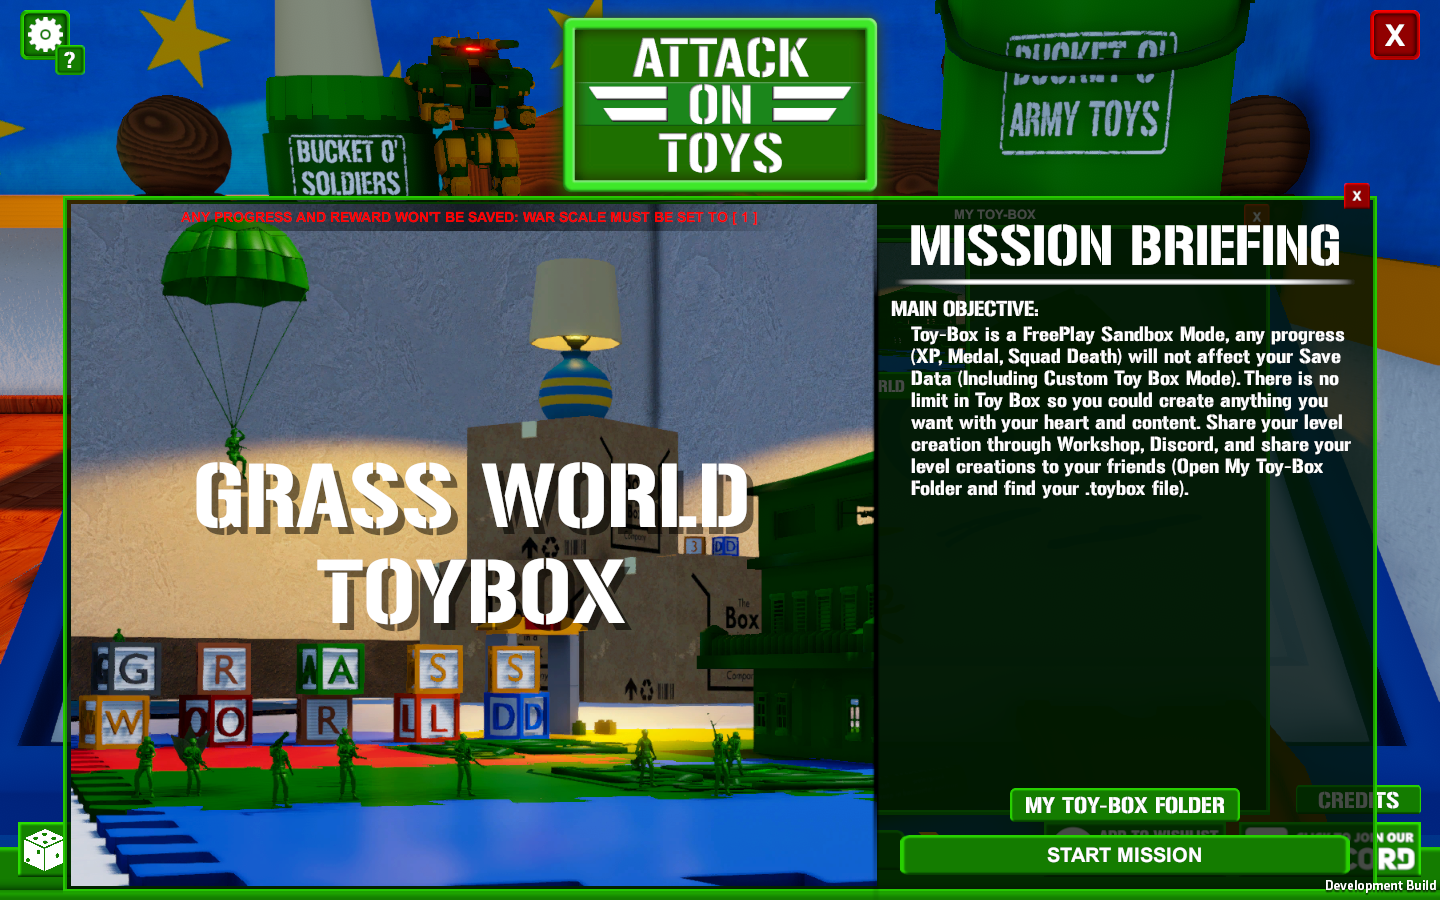 New Dynamic Semi Open World Toy-Box "Grass World". Share your world creation with other or your friends. Mod DB and "STEAM® Workshop soon"